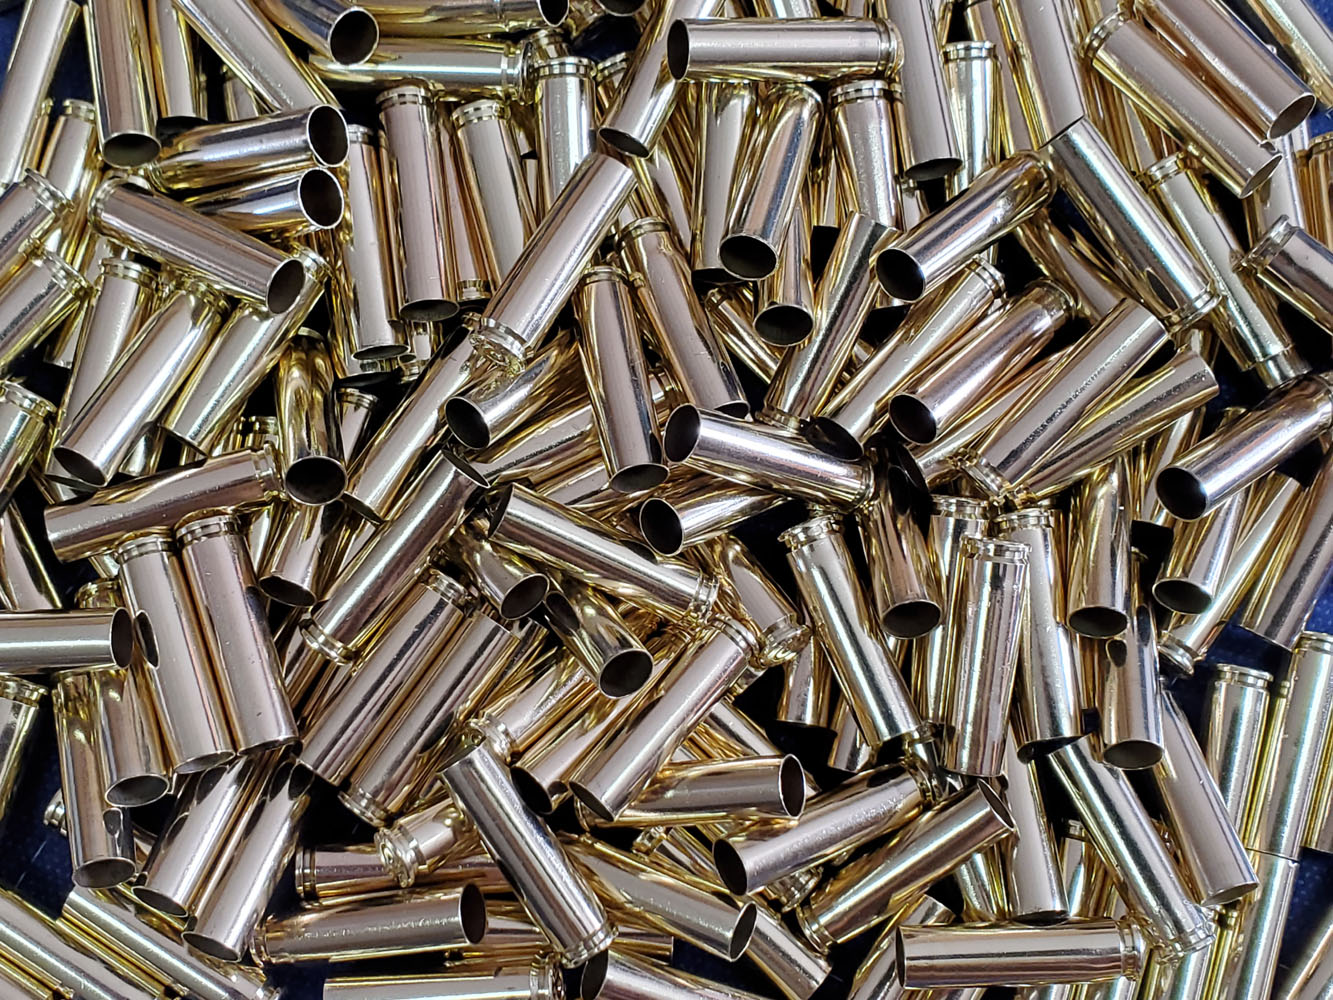 30 Carbine Once Fired Brass, 140 Count, Mixed Head Stamps - Once Fired Brass